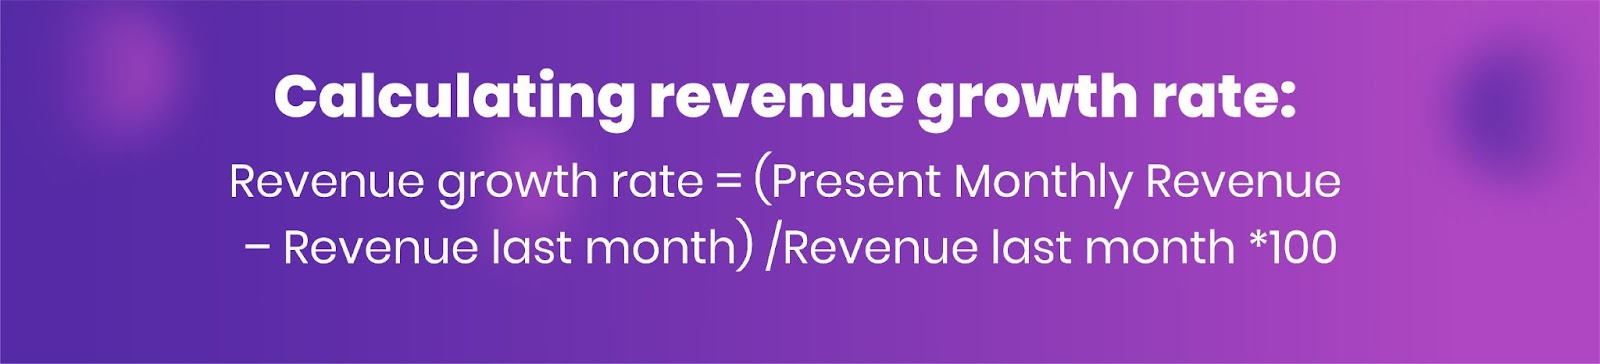 Revenue growth rate